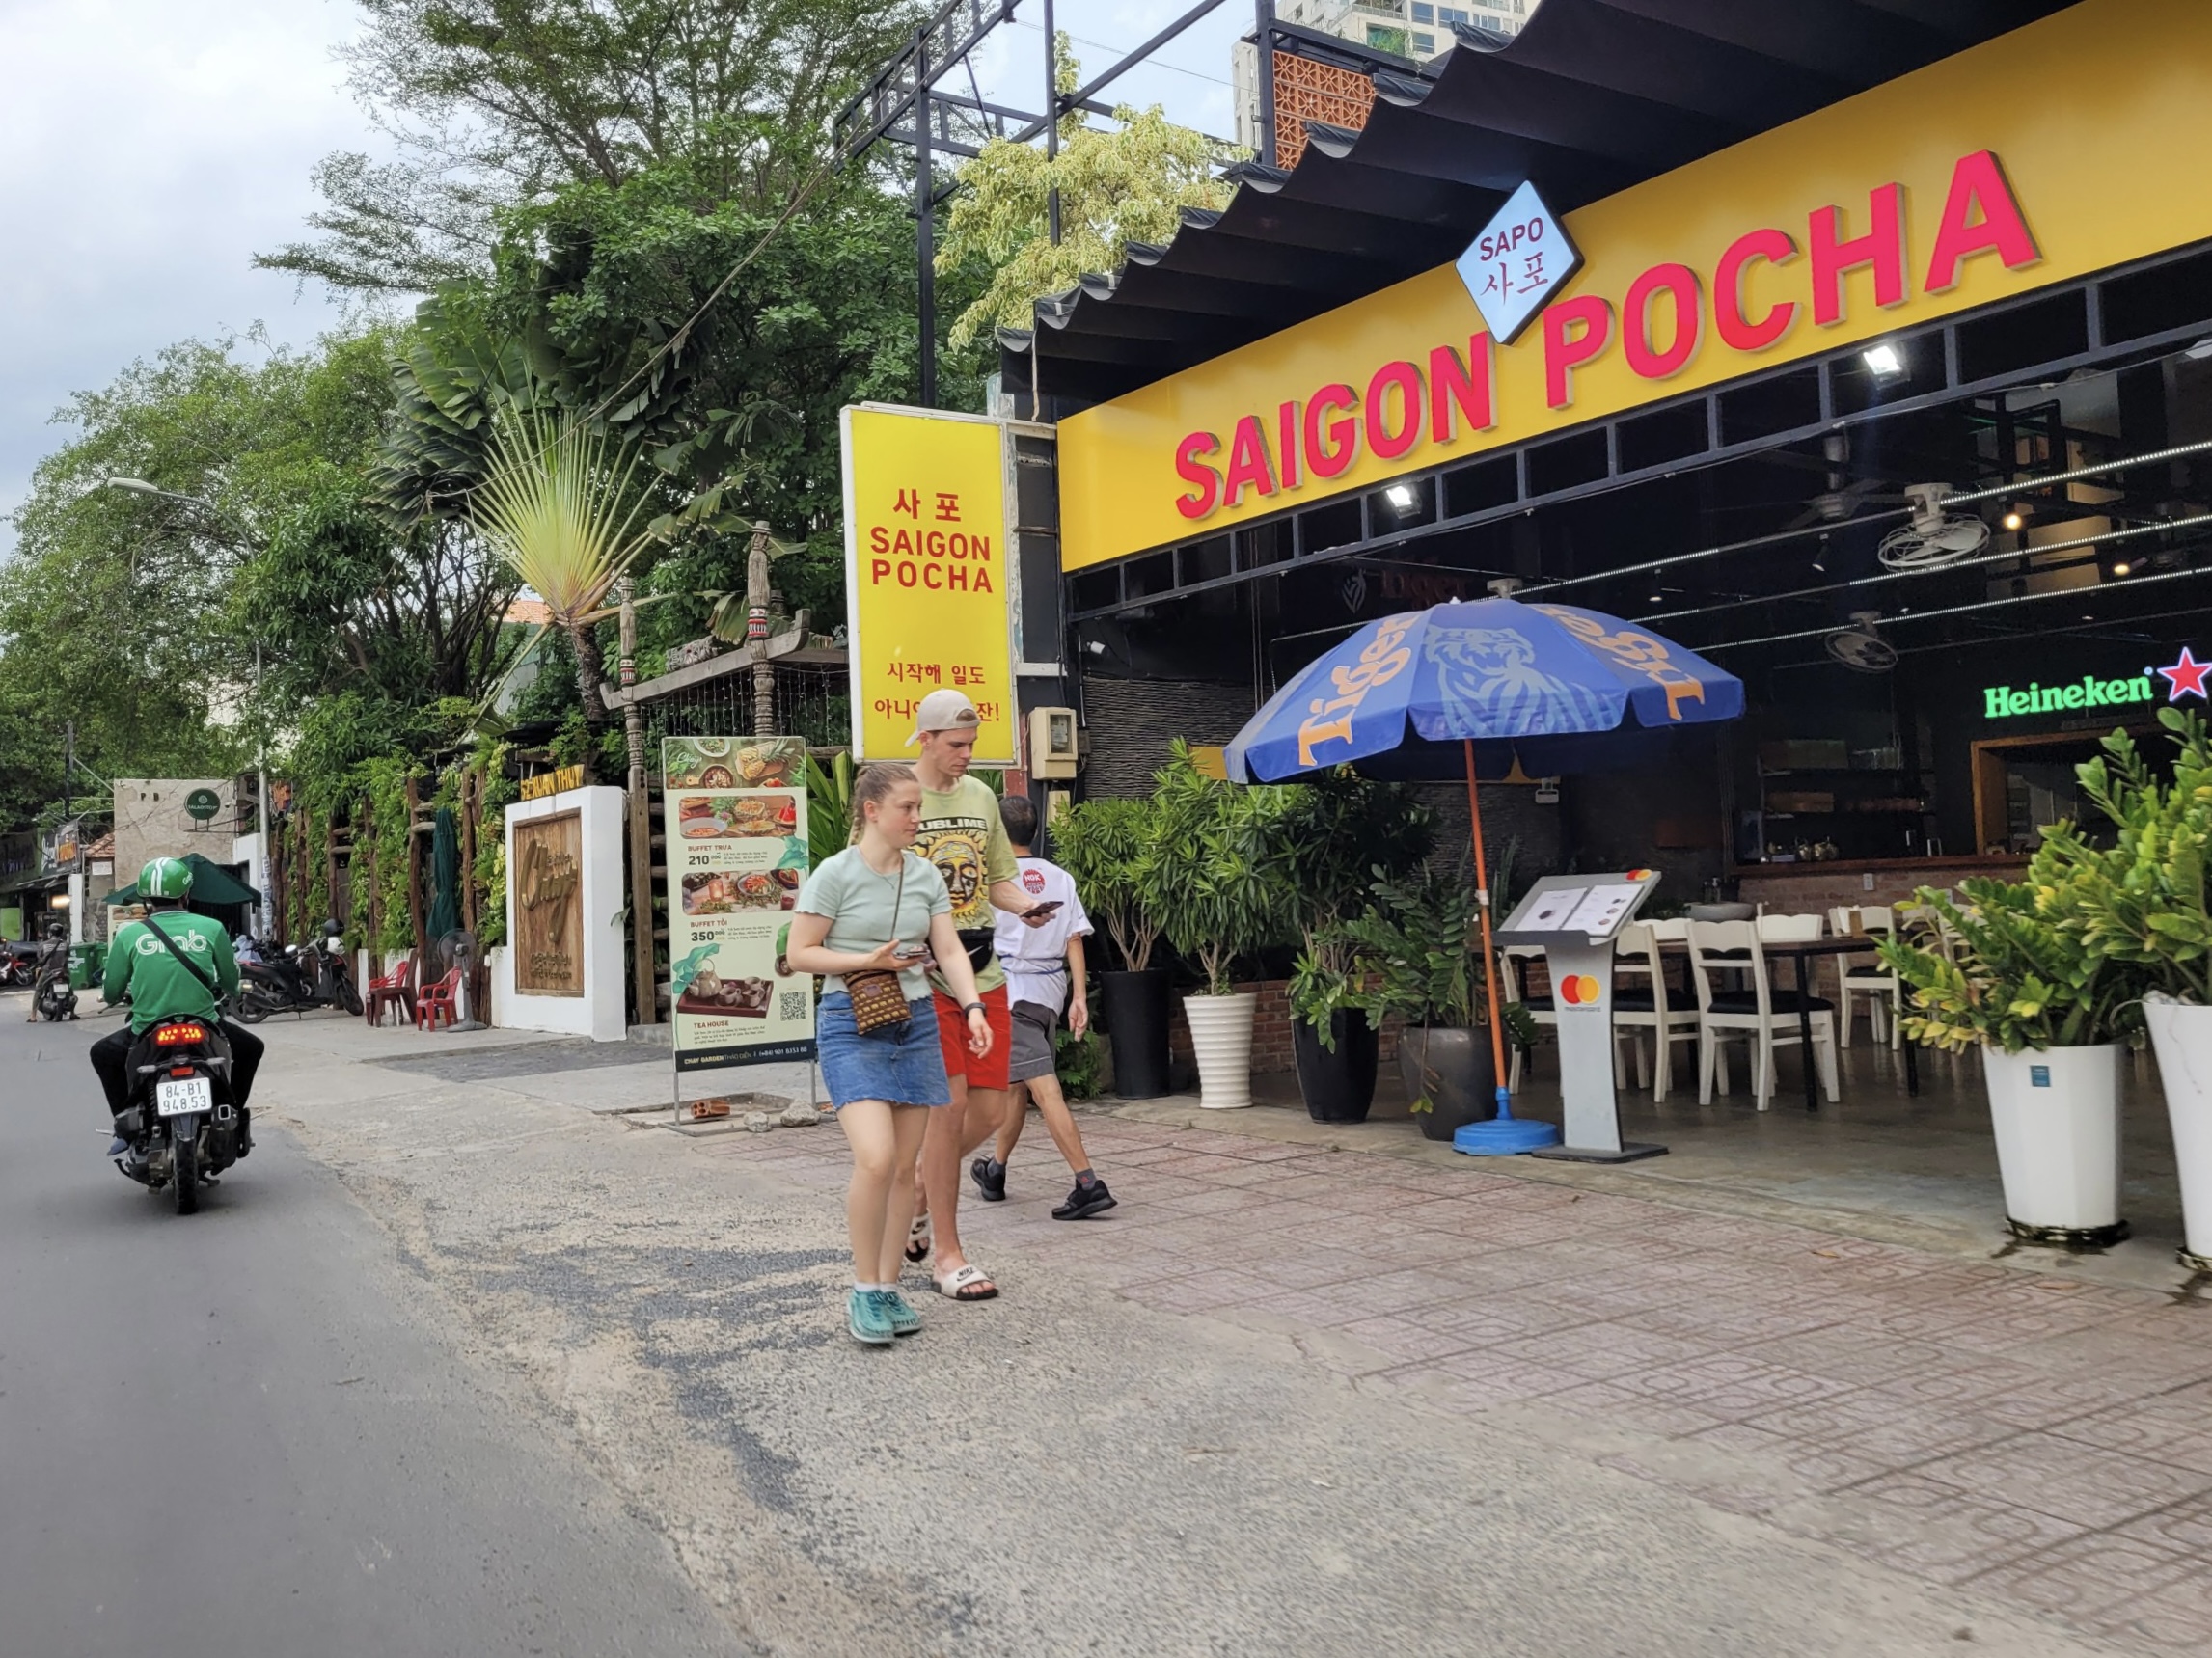 People walk by a restaurant in Thao Dien Ward, an expat hub in Thu Duc City, Ho Chi Minh City. Photo: Ray Kuschert / Tuoi Tre News